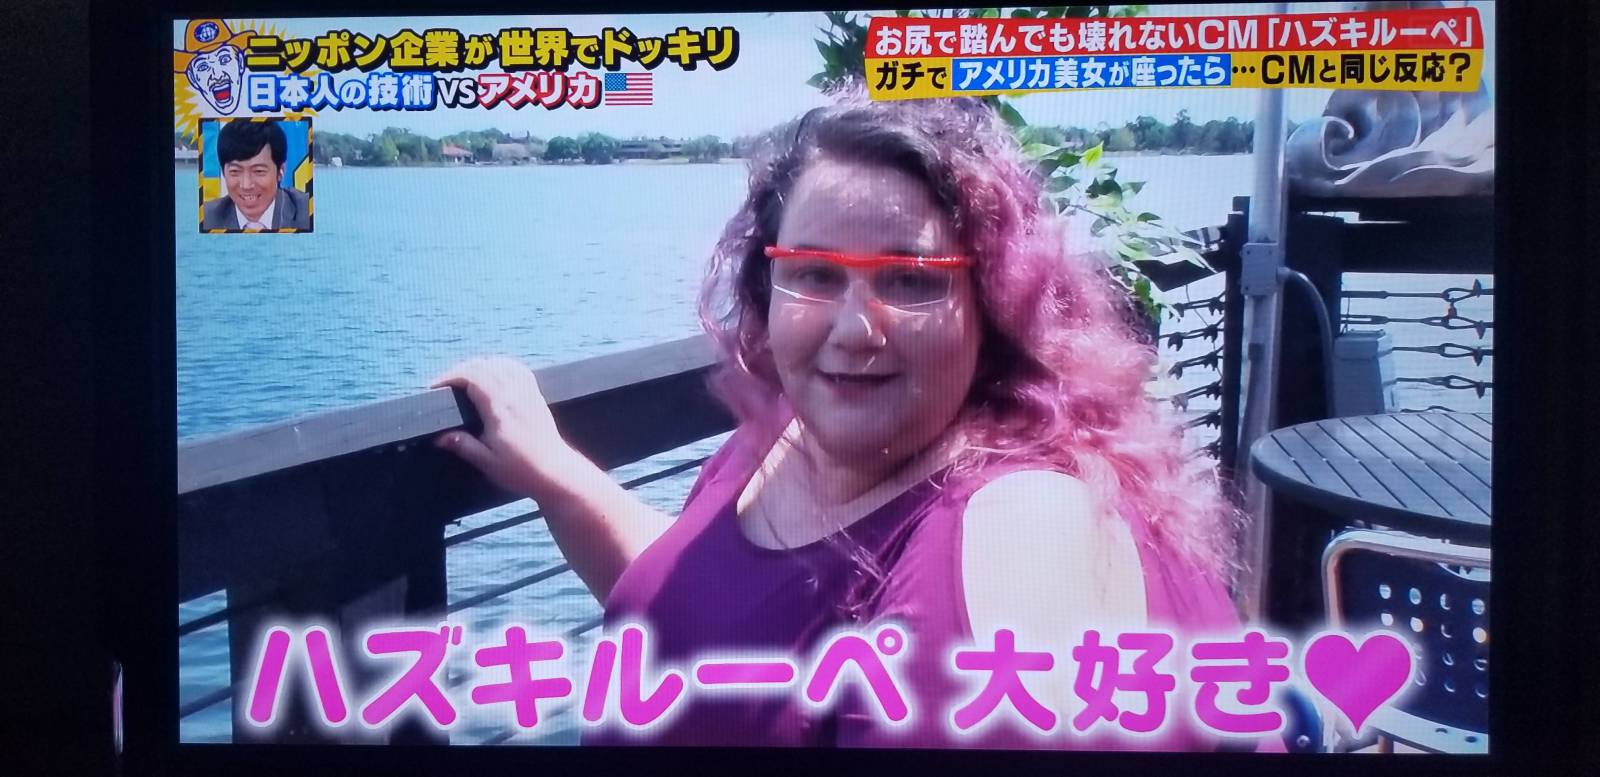 [Sad news] Japan Holhol show, finally had a white woman sit down and praised by Haskiloupe